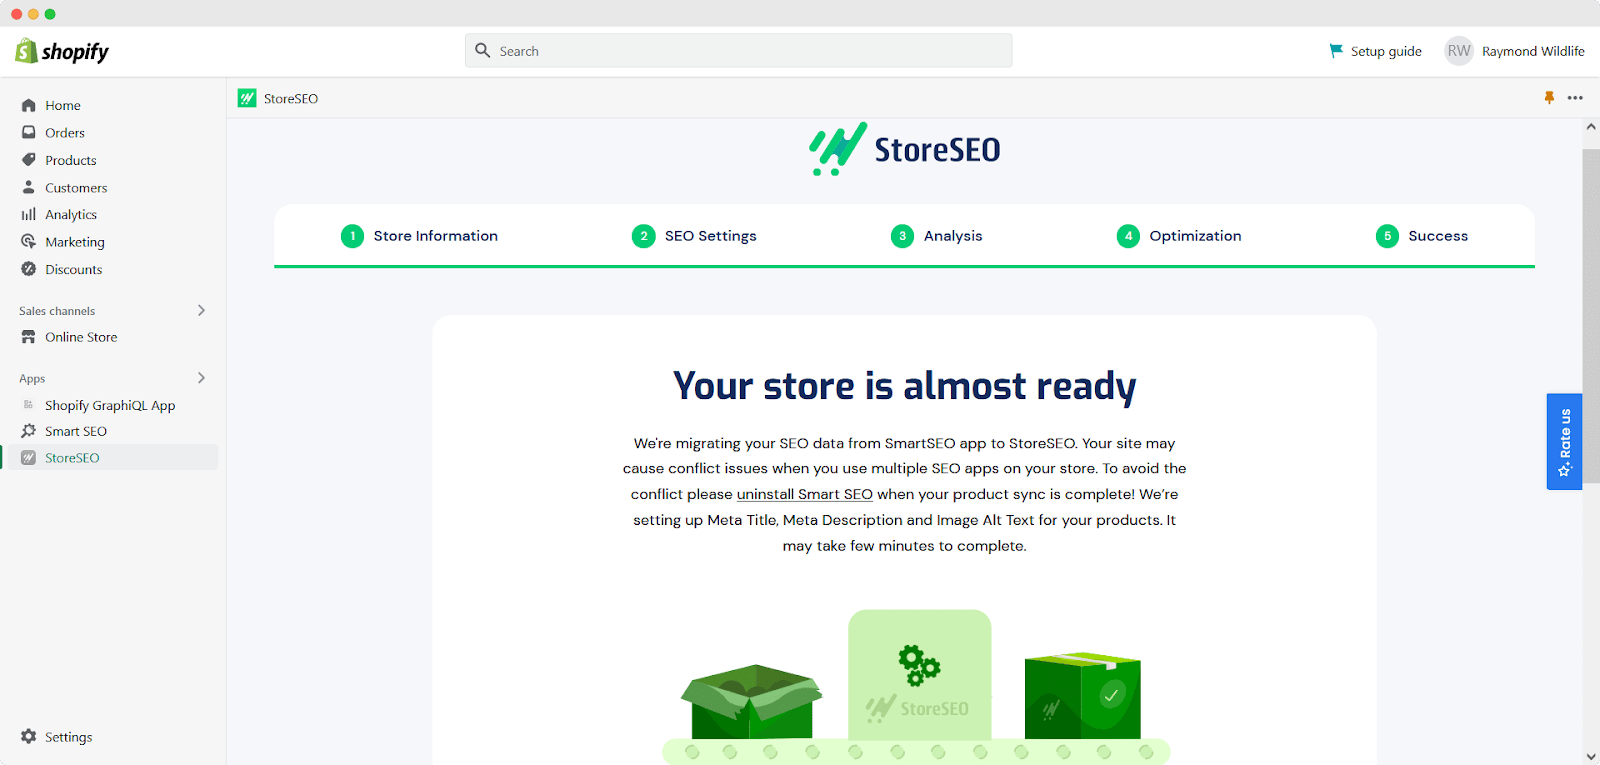 Smart SEO To StoreSEO